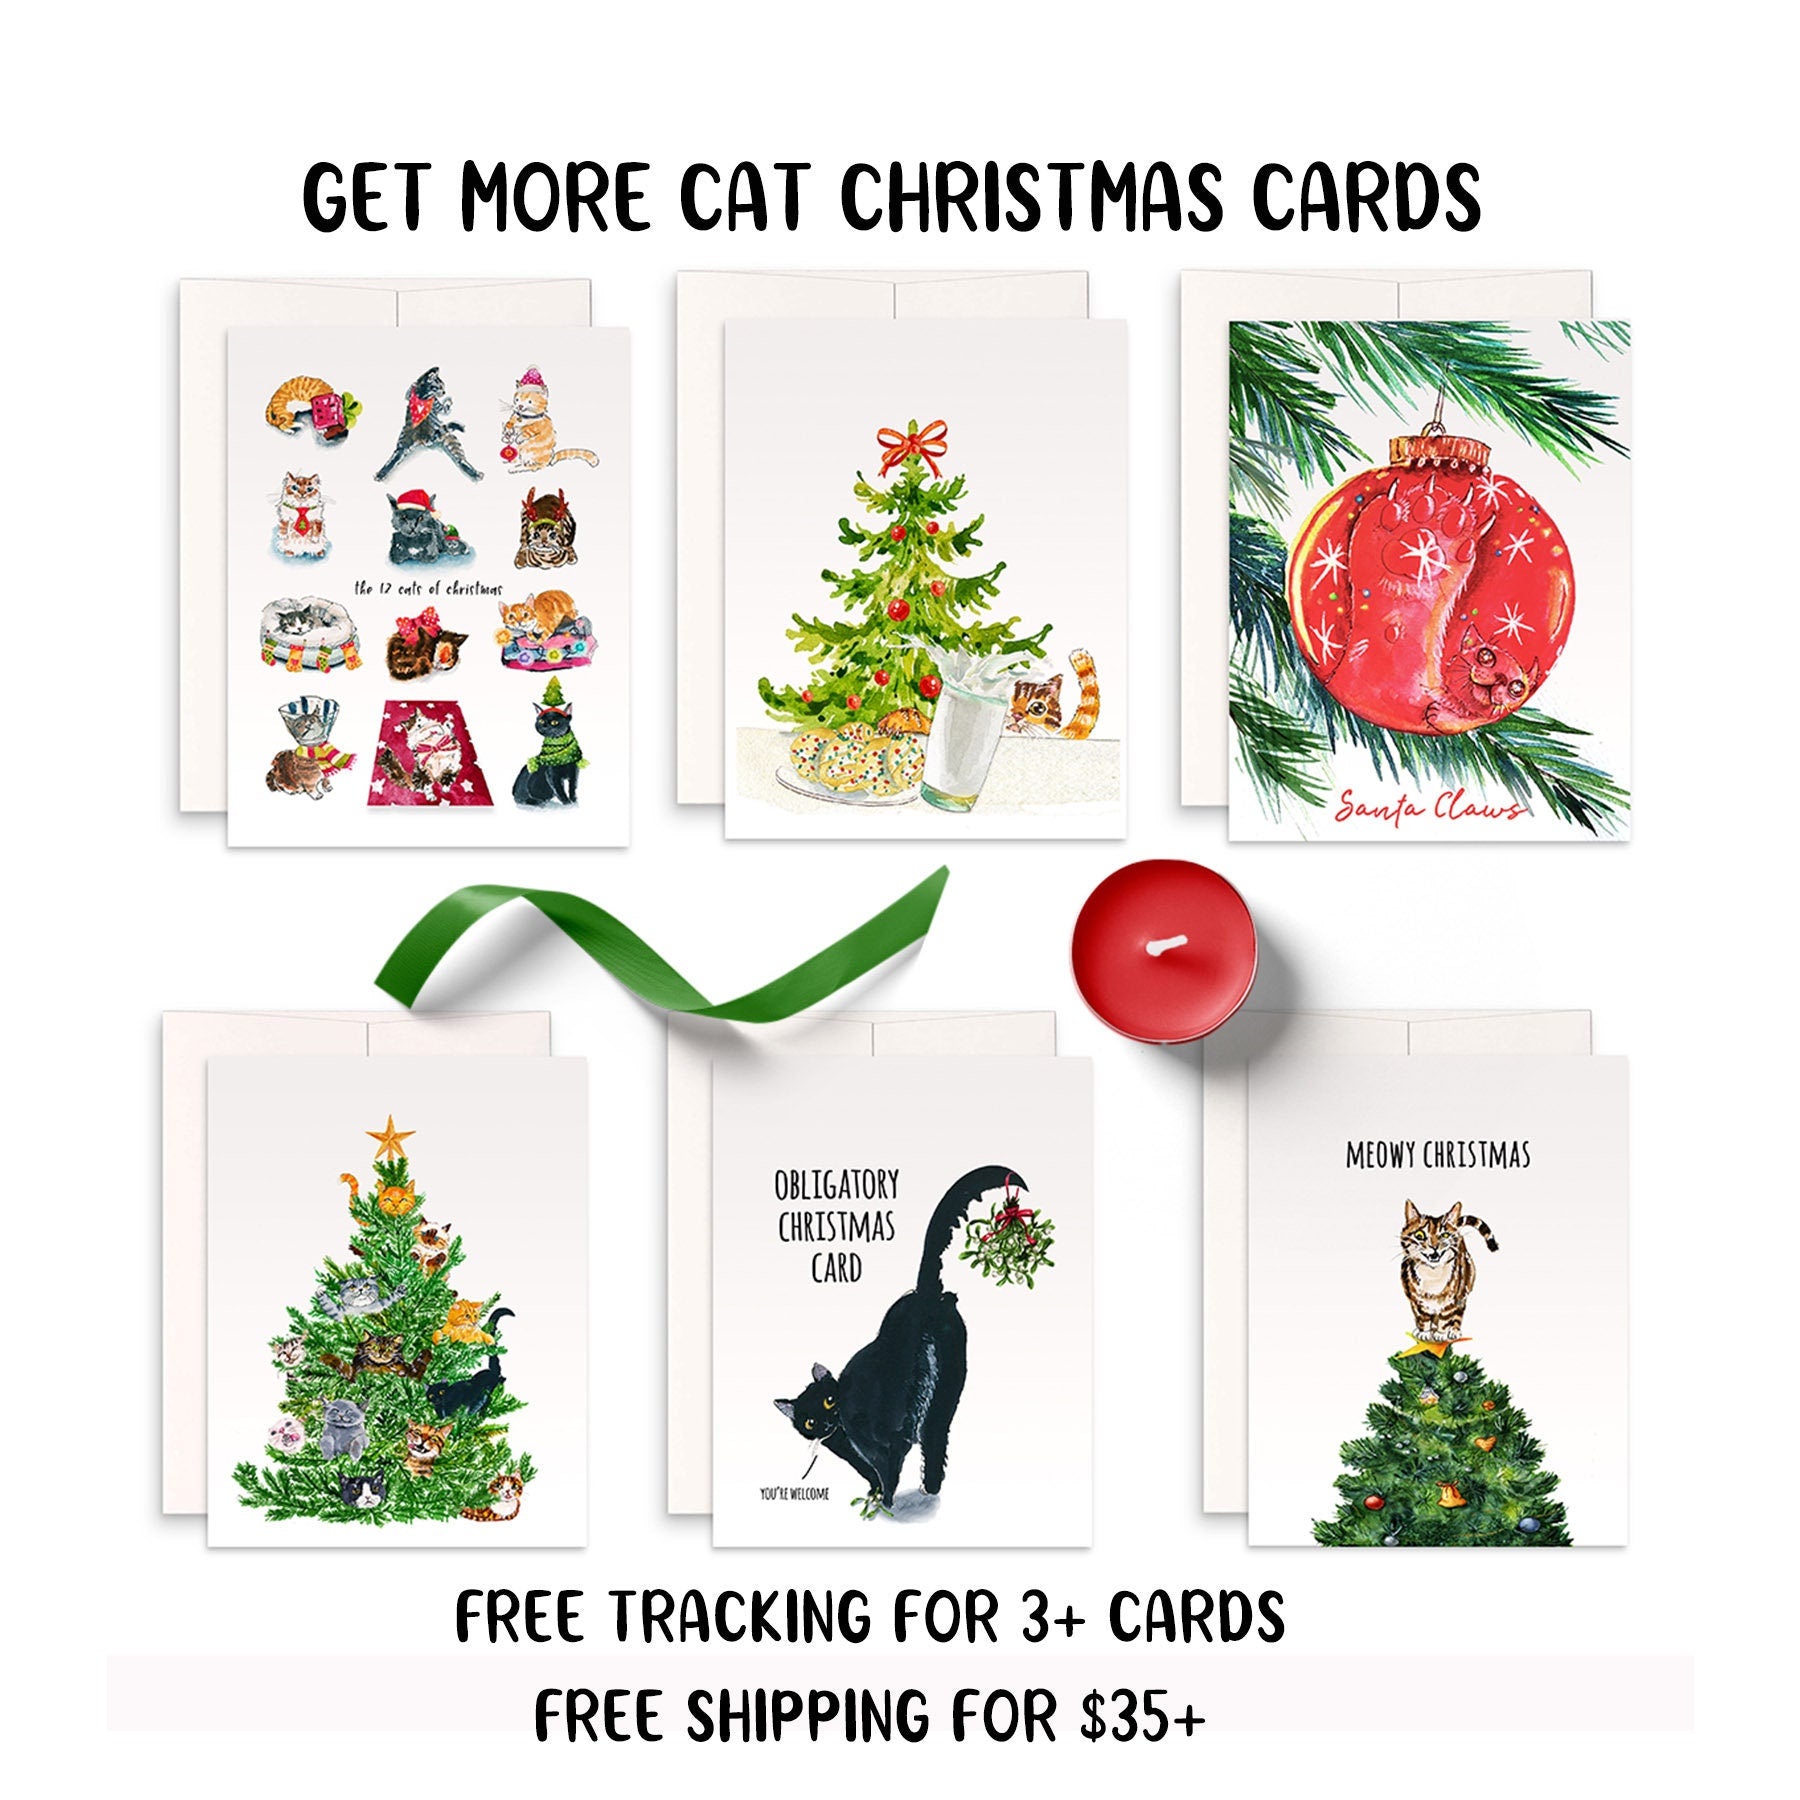 Cozy Warm Kitty Cat Christmas Card For Cat Lover, Silent Night Christmas Eve Card From Cat, Funny Christmas Card, Merry Xmas, Fireplace Card